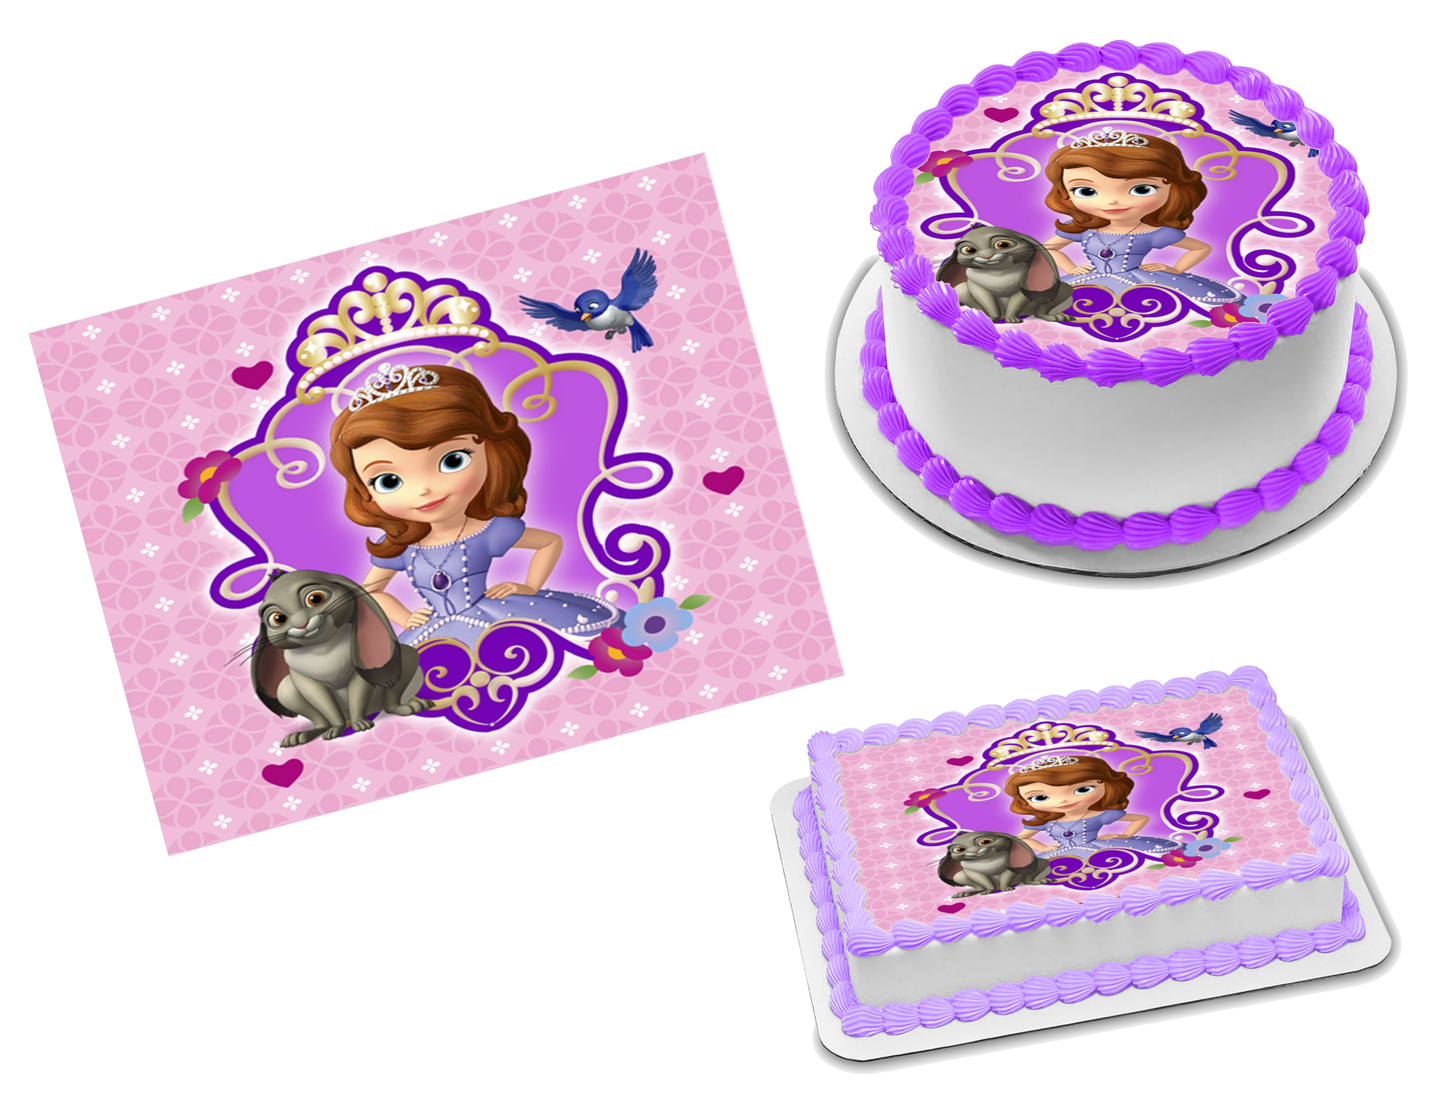 Sofia the First Edible Image Frosting Sheet #12 (70+ sizes)